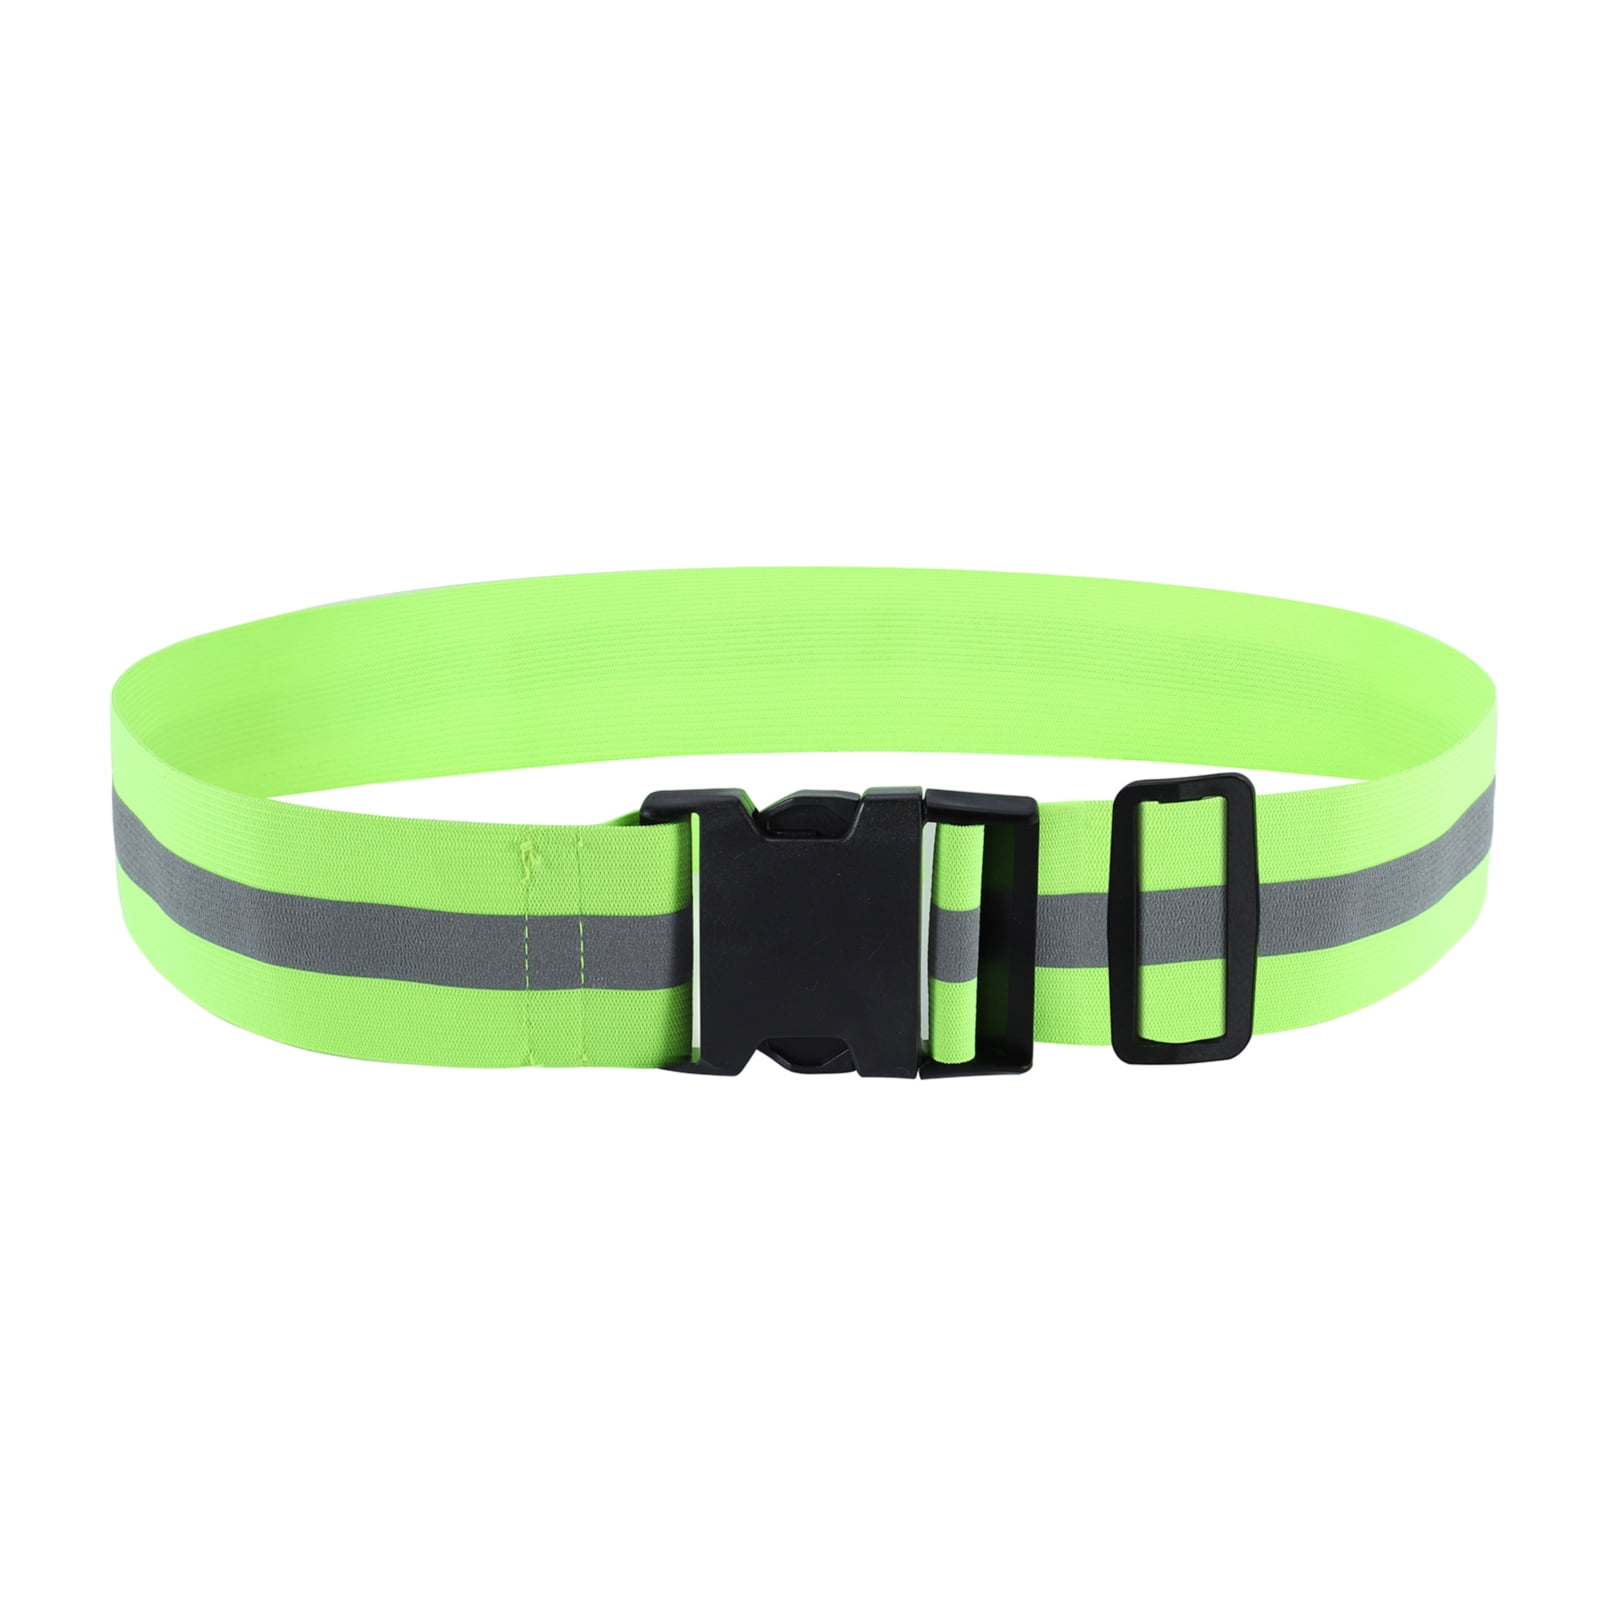 US ARMY REFLECTIVE SAFETY HIGH VISIBILITY PHYSICAL TRAINING WHITE PT BELT  8835 